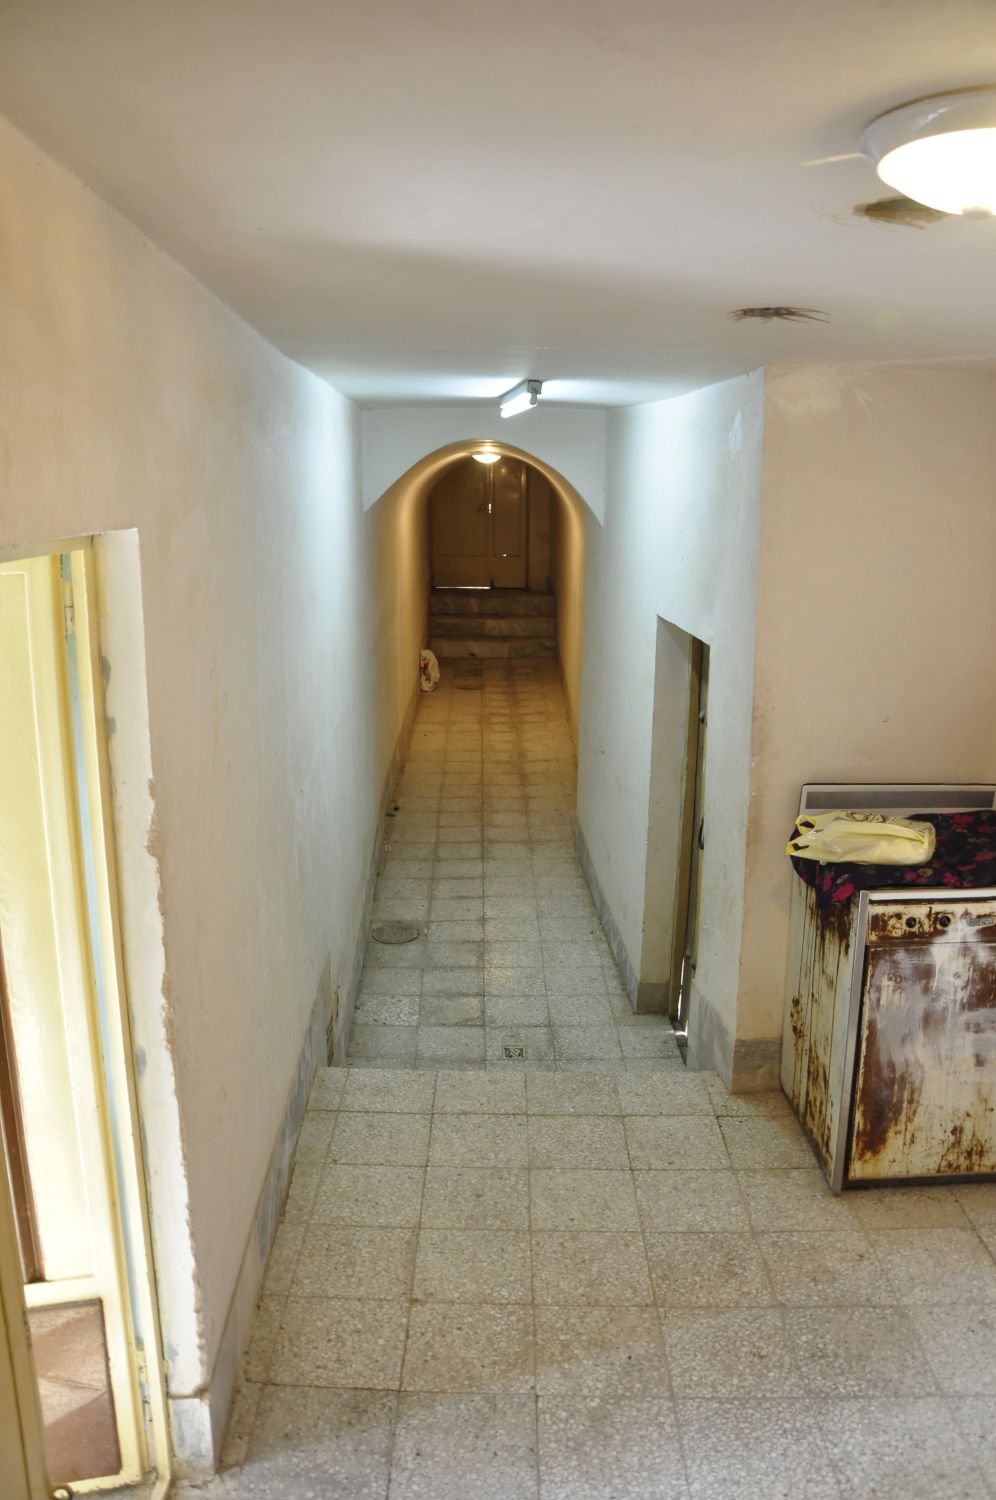 <p>The corridor leading to the main entrance.</p>